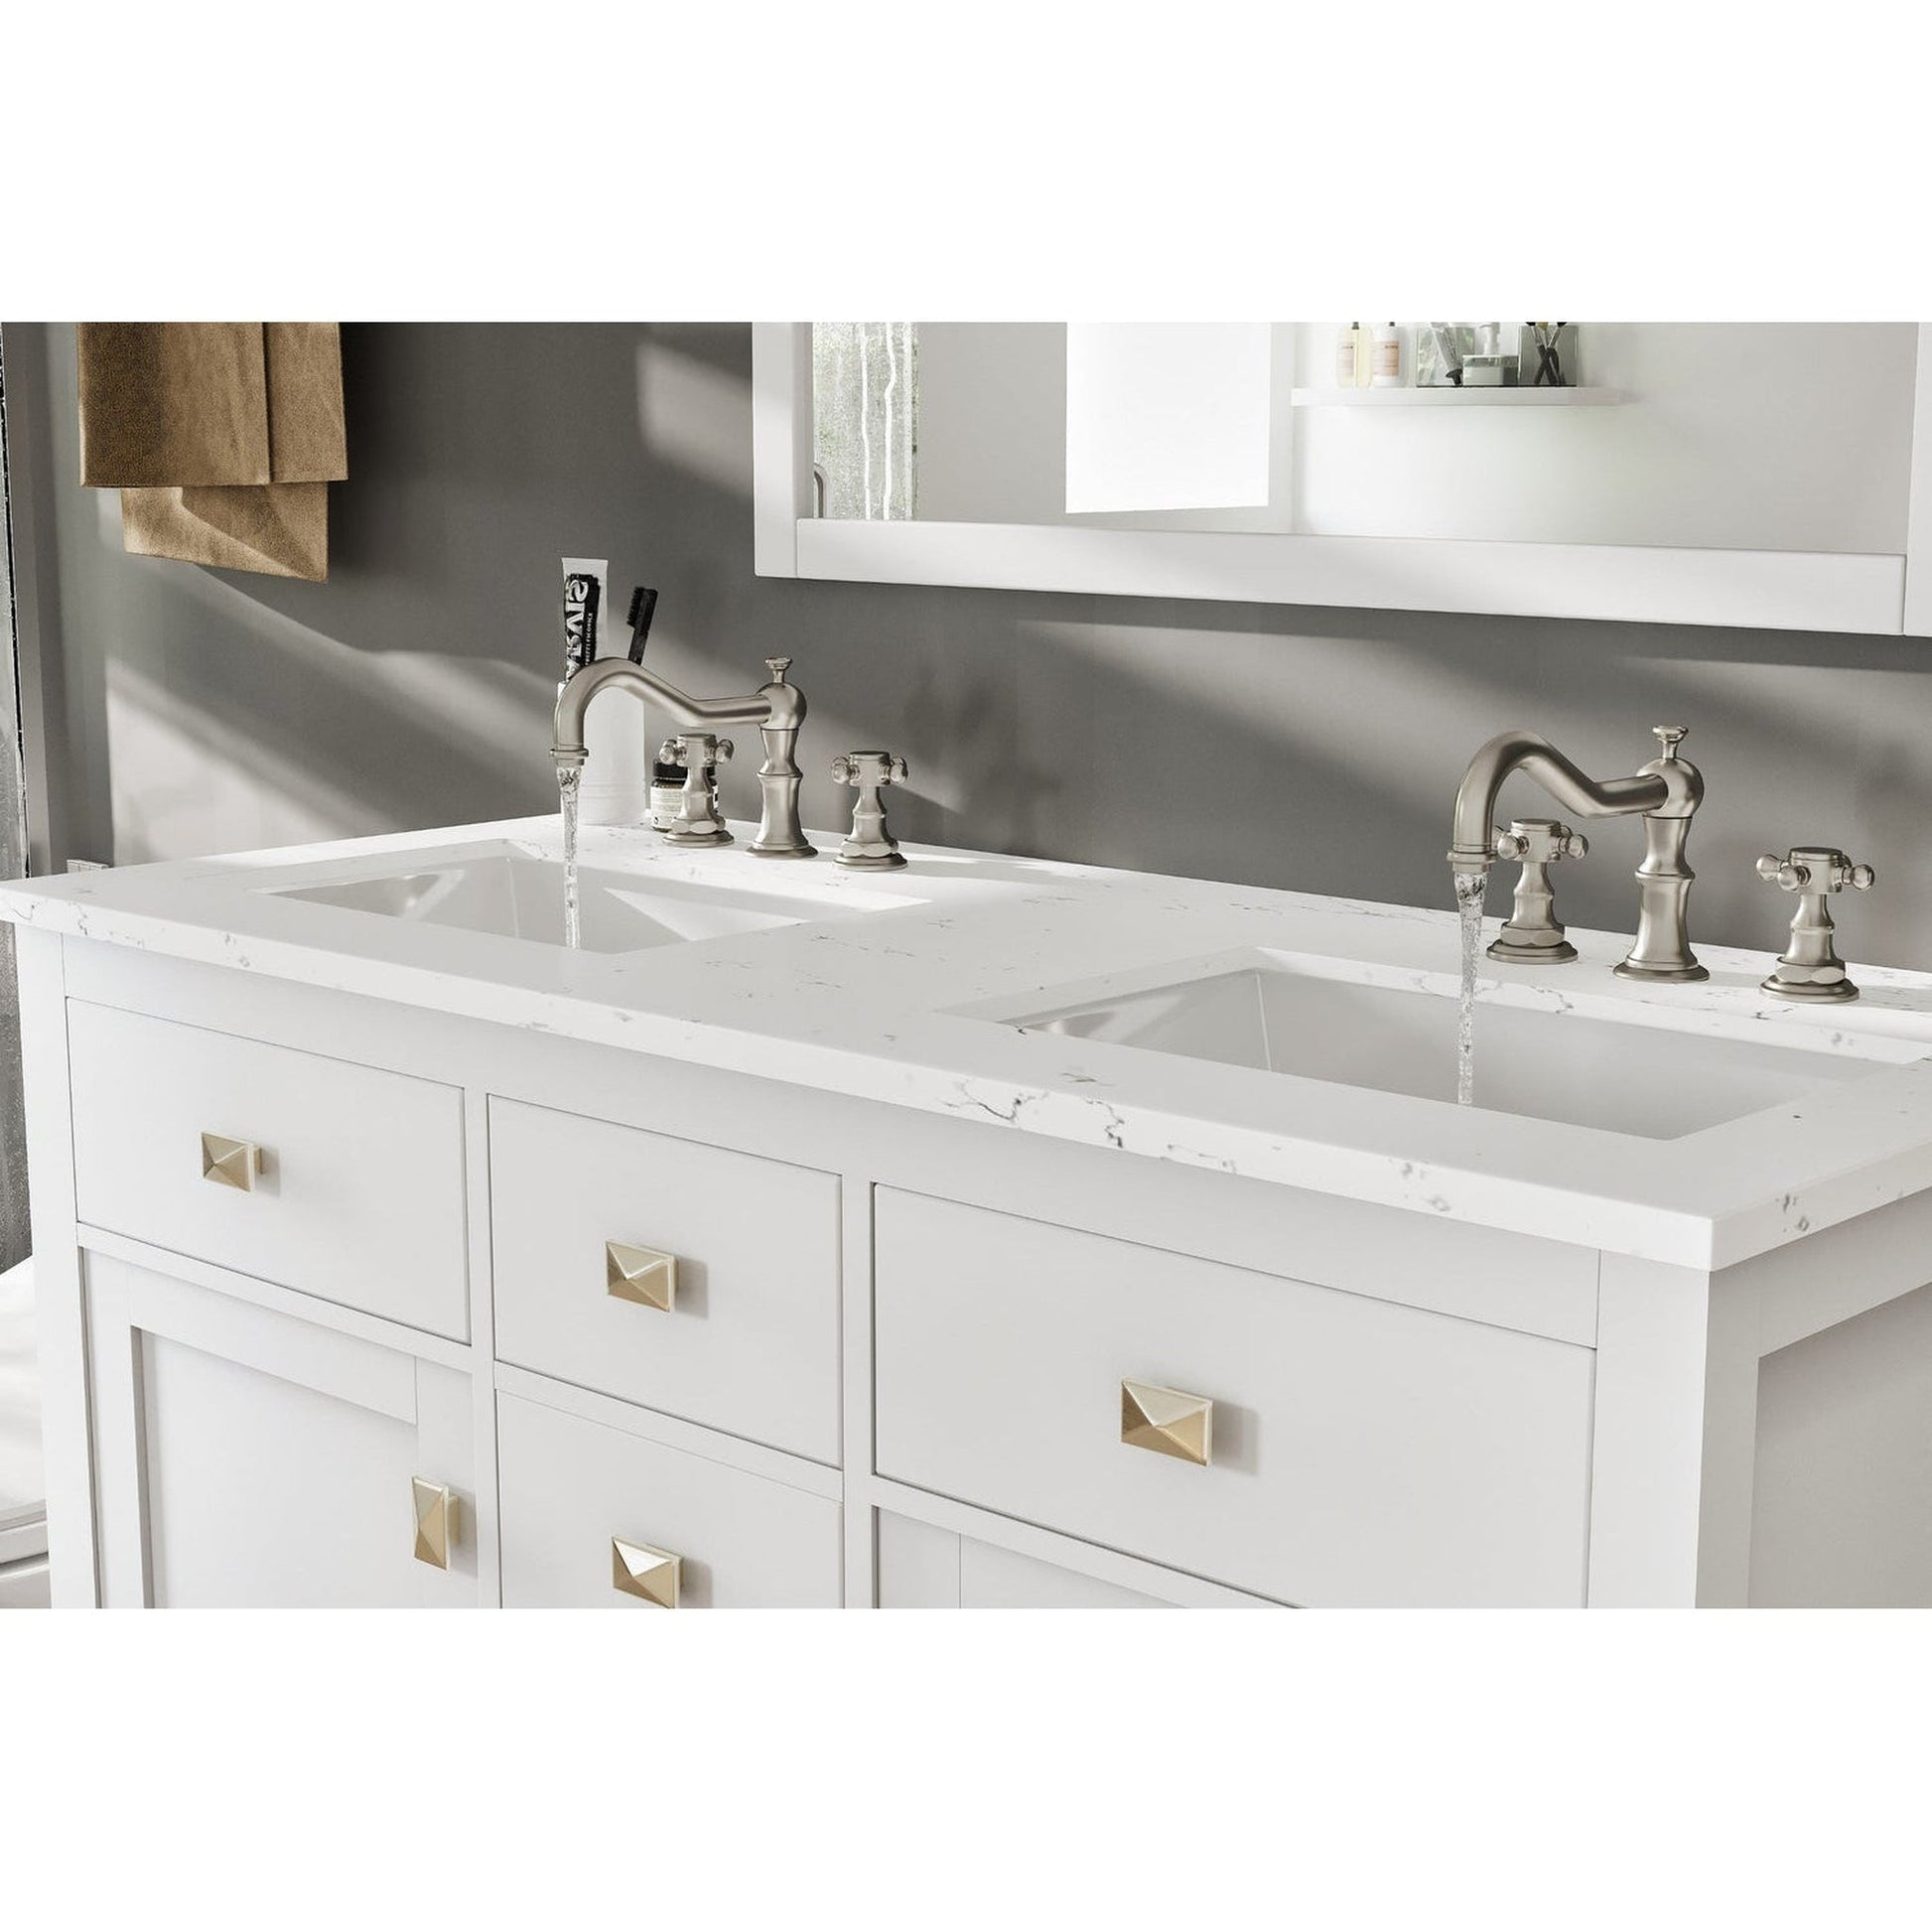 Eviva Totti Artemis 44" x 34" White Freestanding Bathroom Vanity With Carrara Style Man-made Stone Countertop and Double Undermount Sink